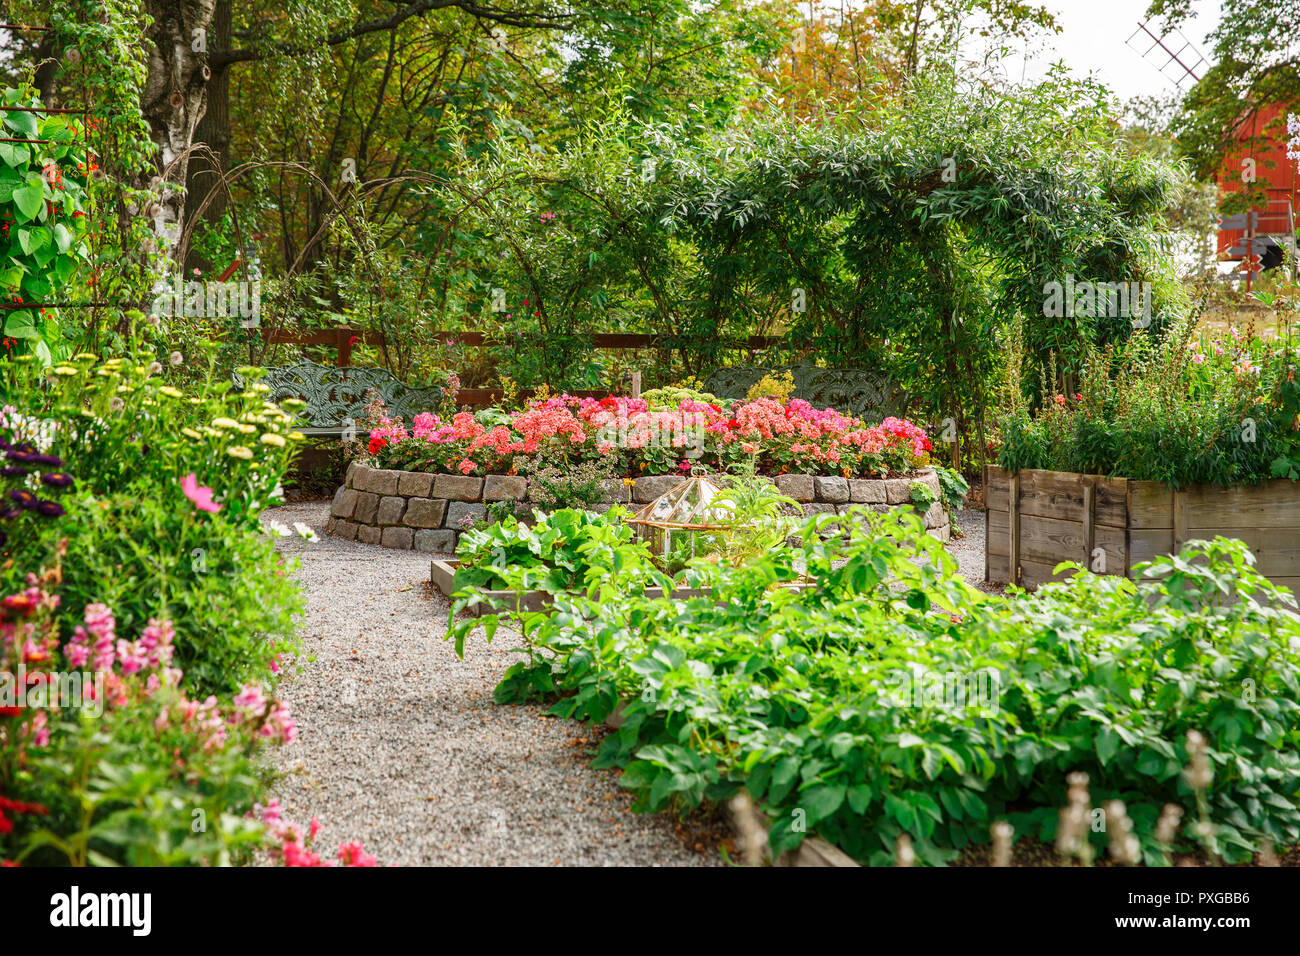 Vegetable and flower garden in sunny summer day. Stock Photo